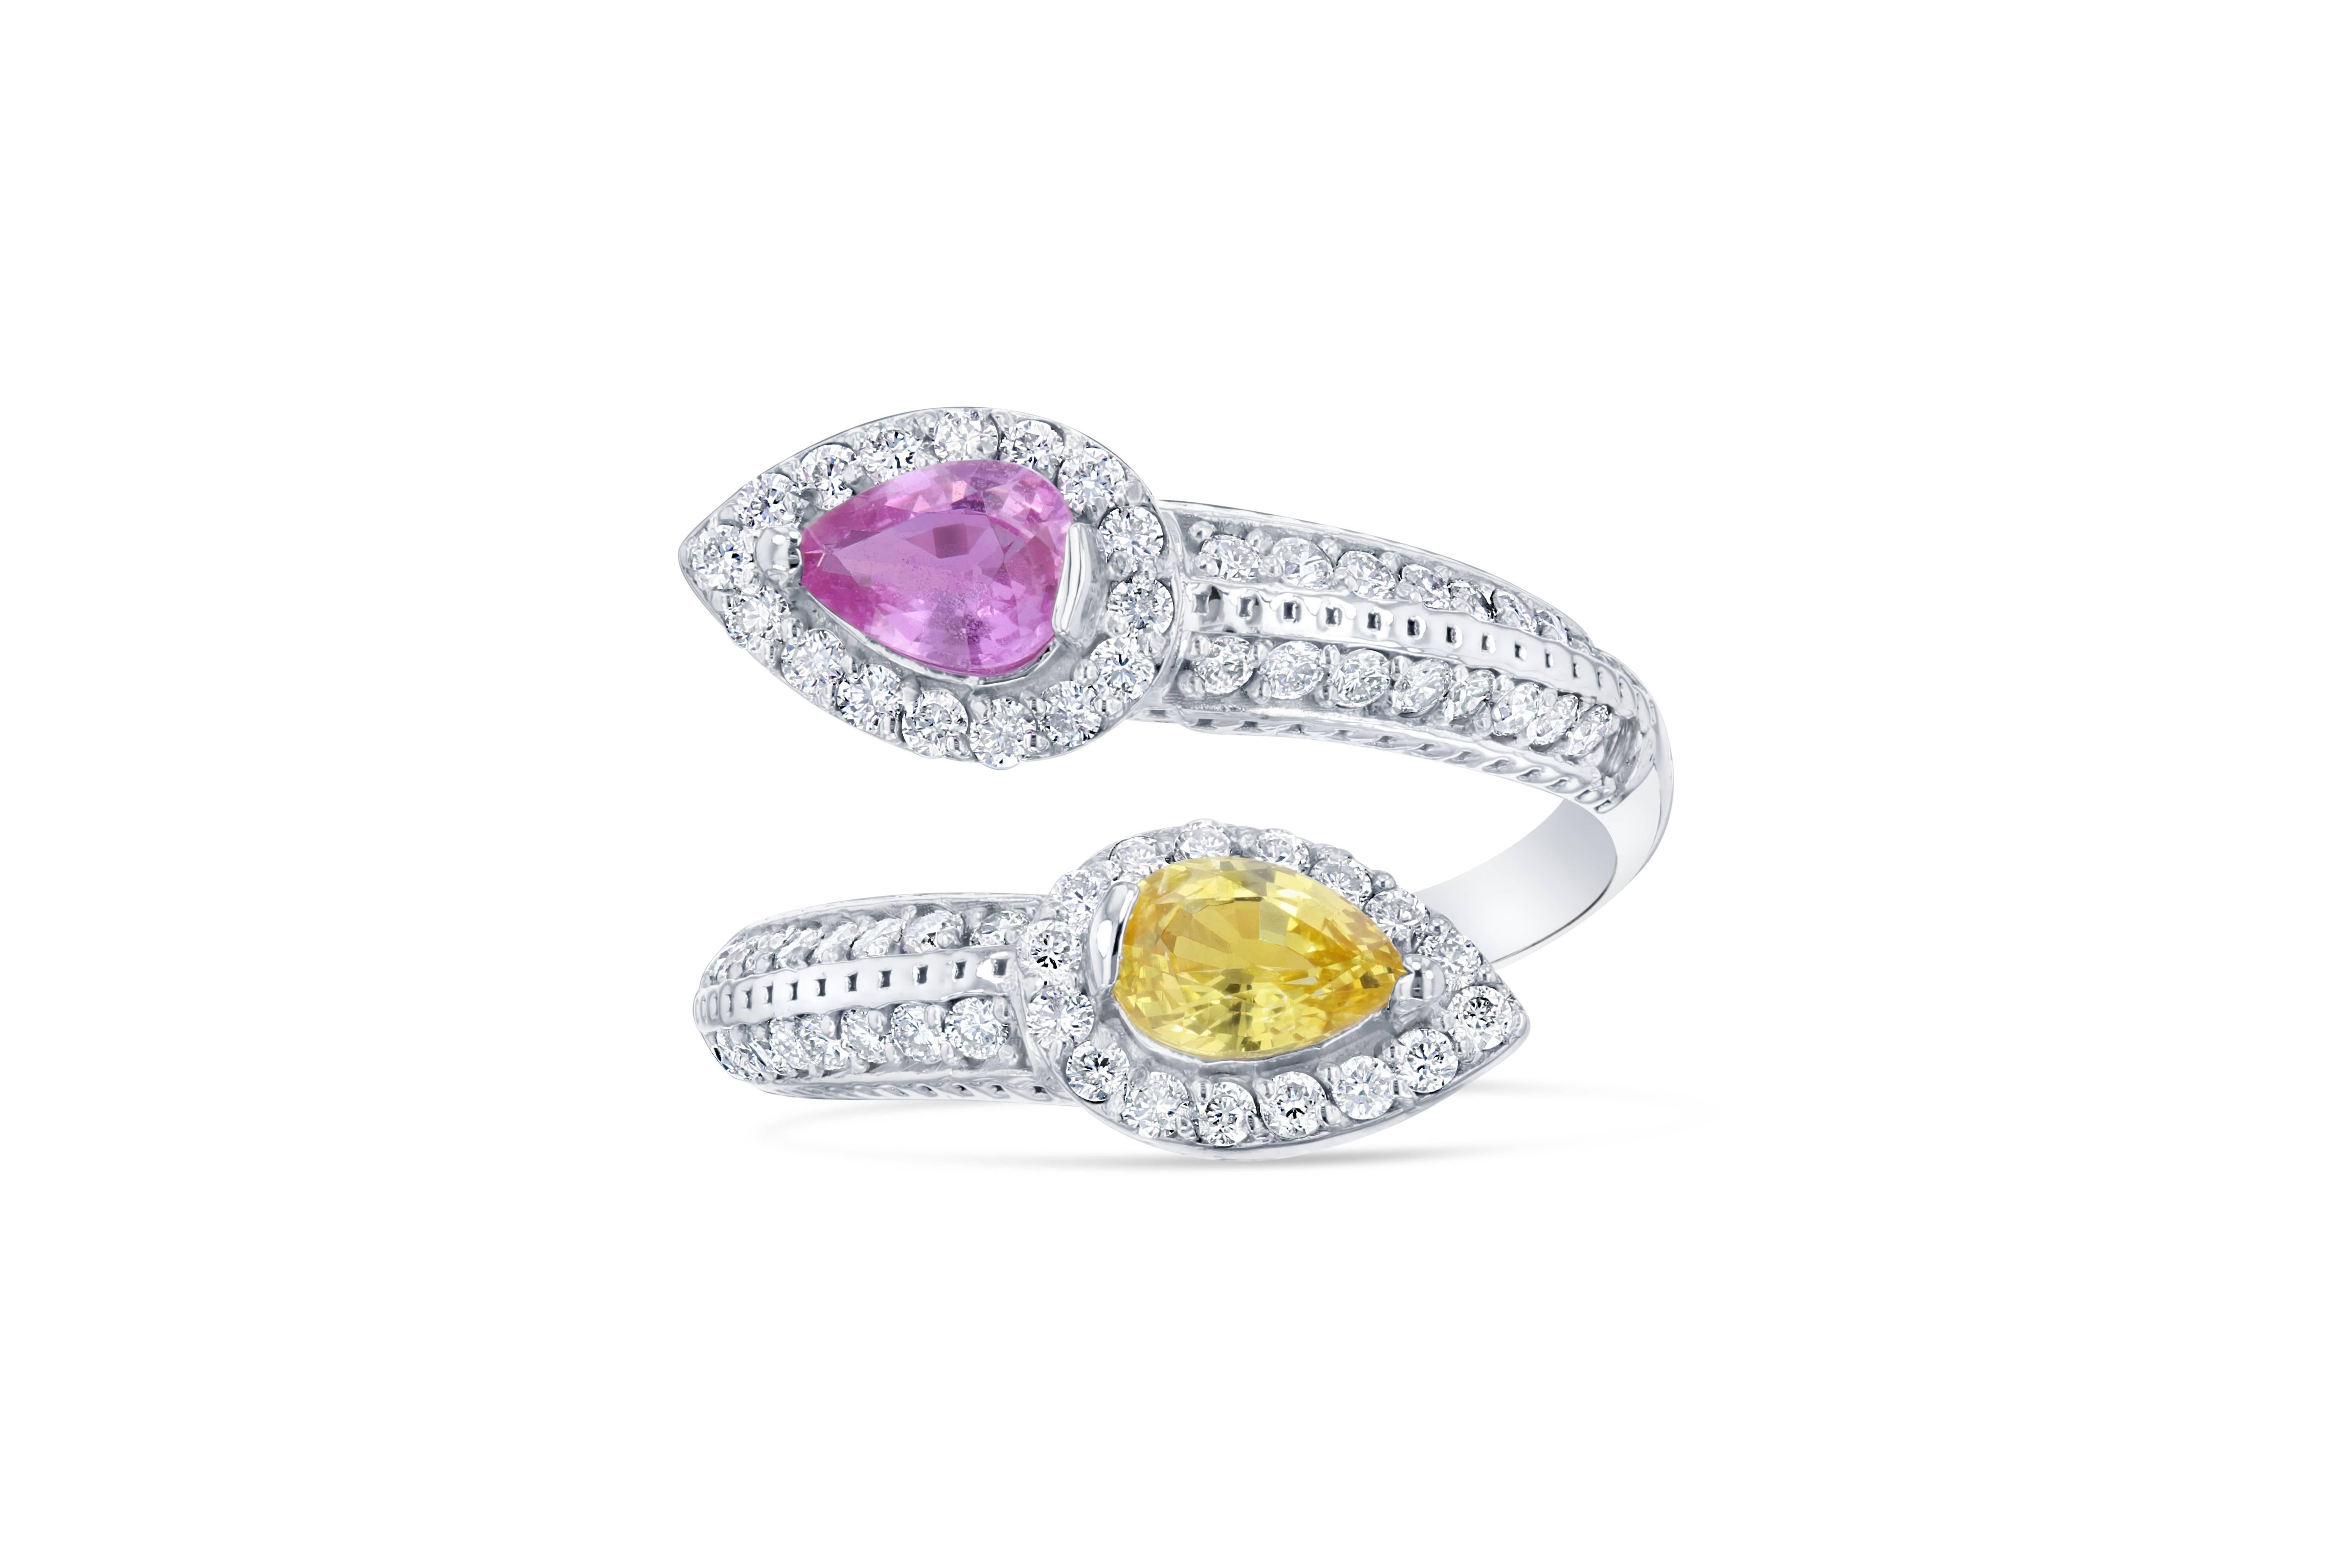 Cute Pear Cut Pink and Yellow Sapphire Ring accented with Round Cut Diamonds! This ring has 2 Pear Cut Yellow and Pink Sapphires that weigh a total of  0.96 carat.  The ring is surrounded by 68 Round Cut Diamonds that weigh 0.60 carat. This ring is